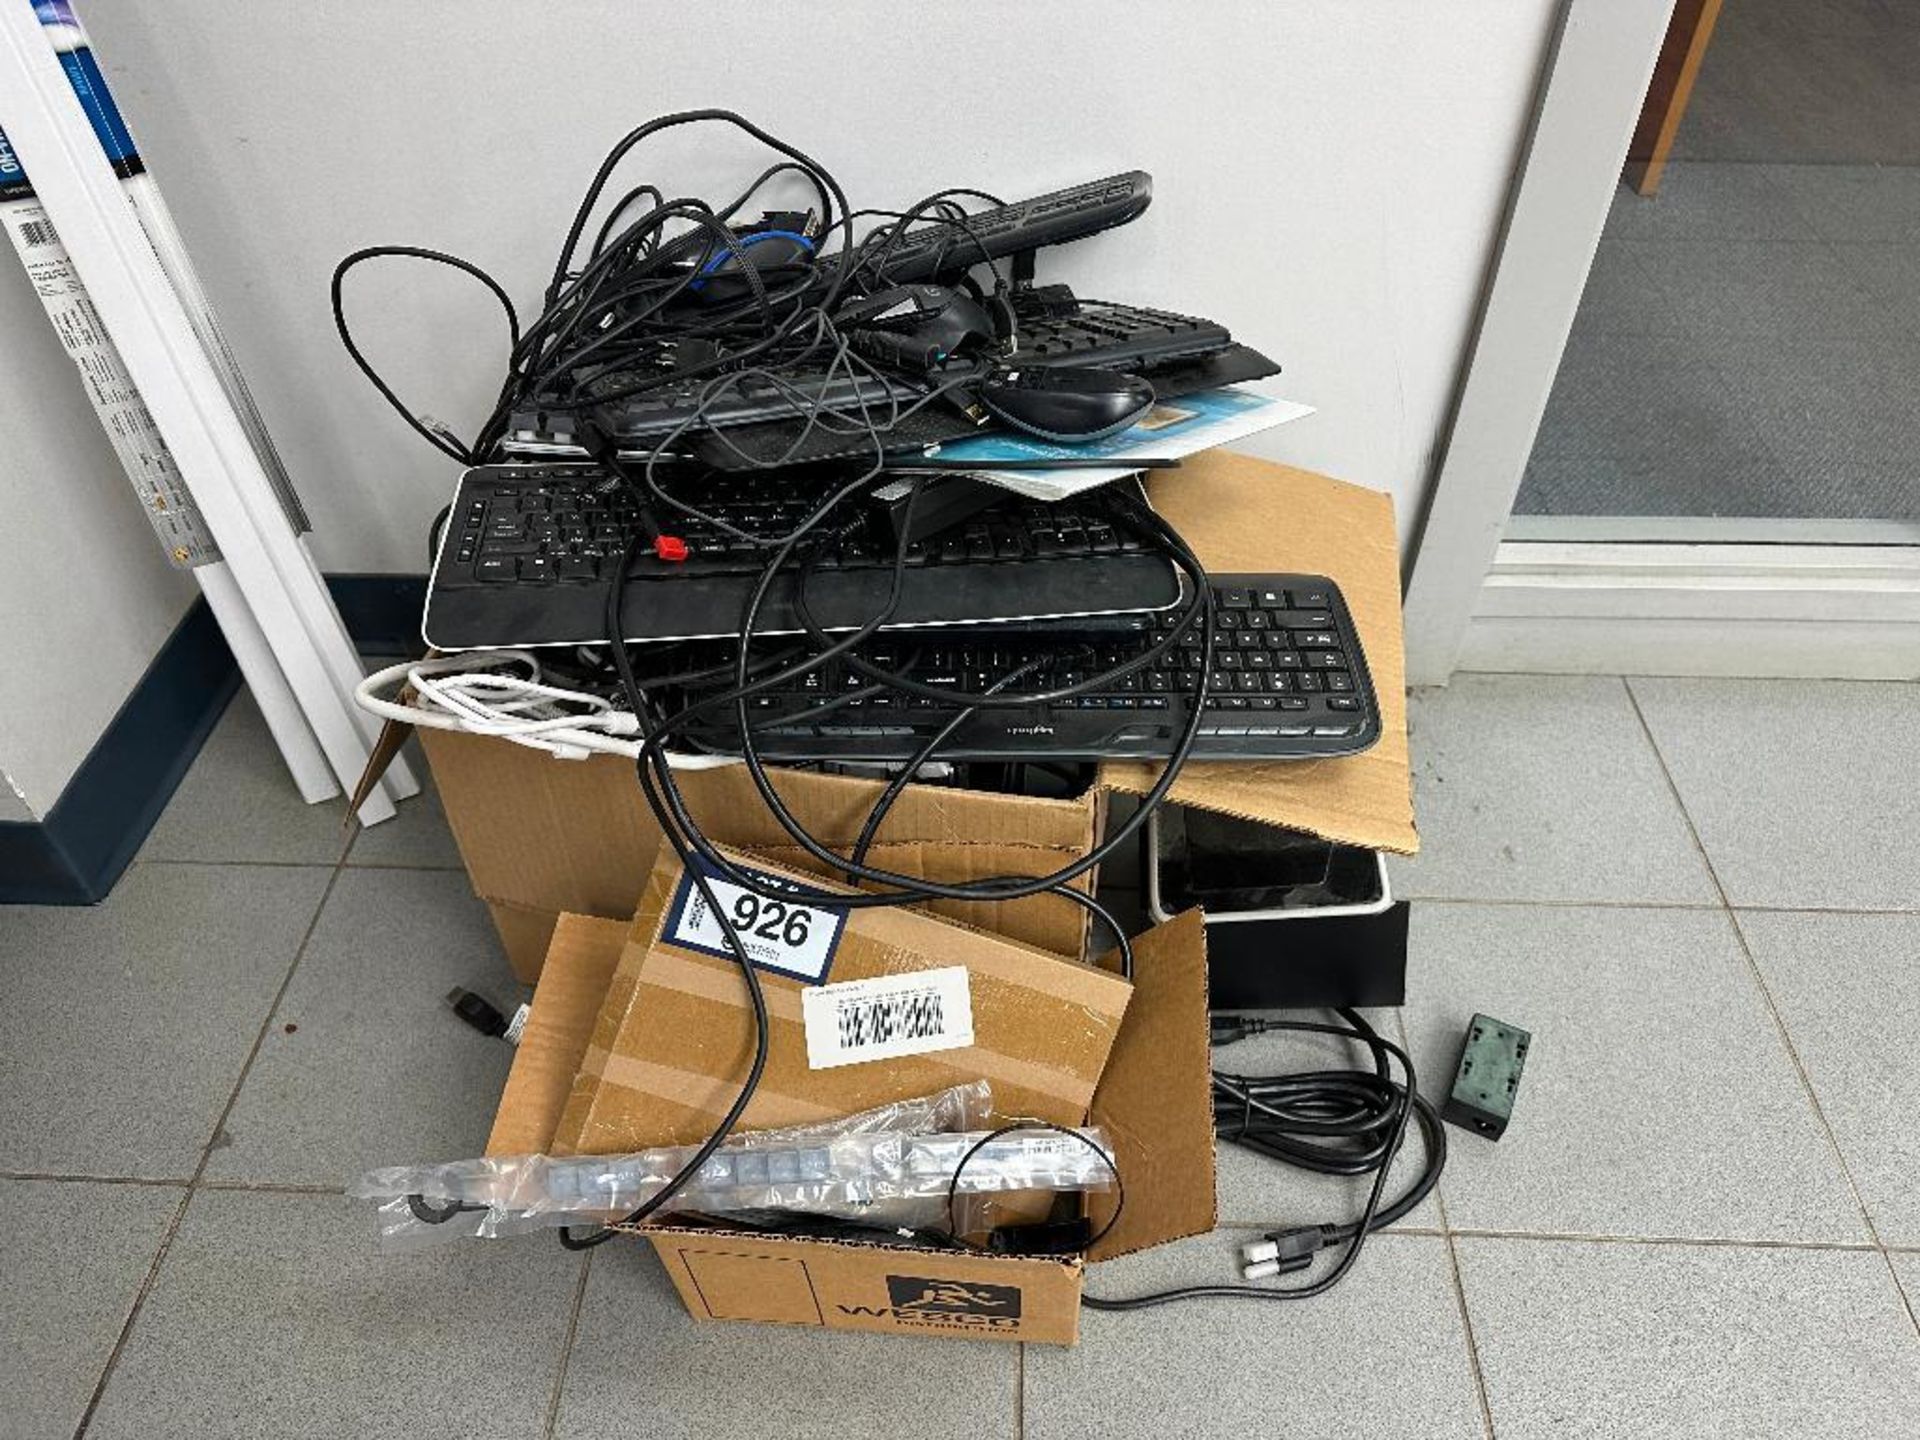 Lot of Asst. Cords, Keyboards, etc. - Image 2 of 4